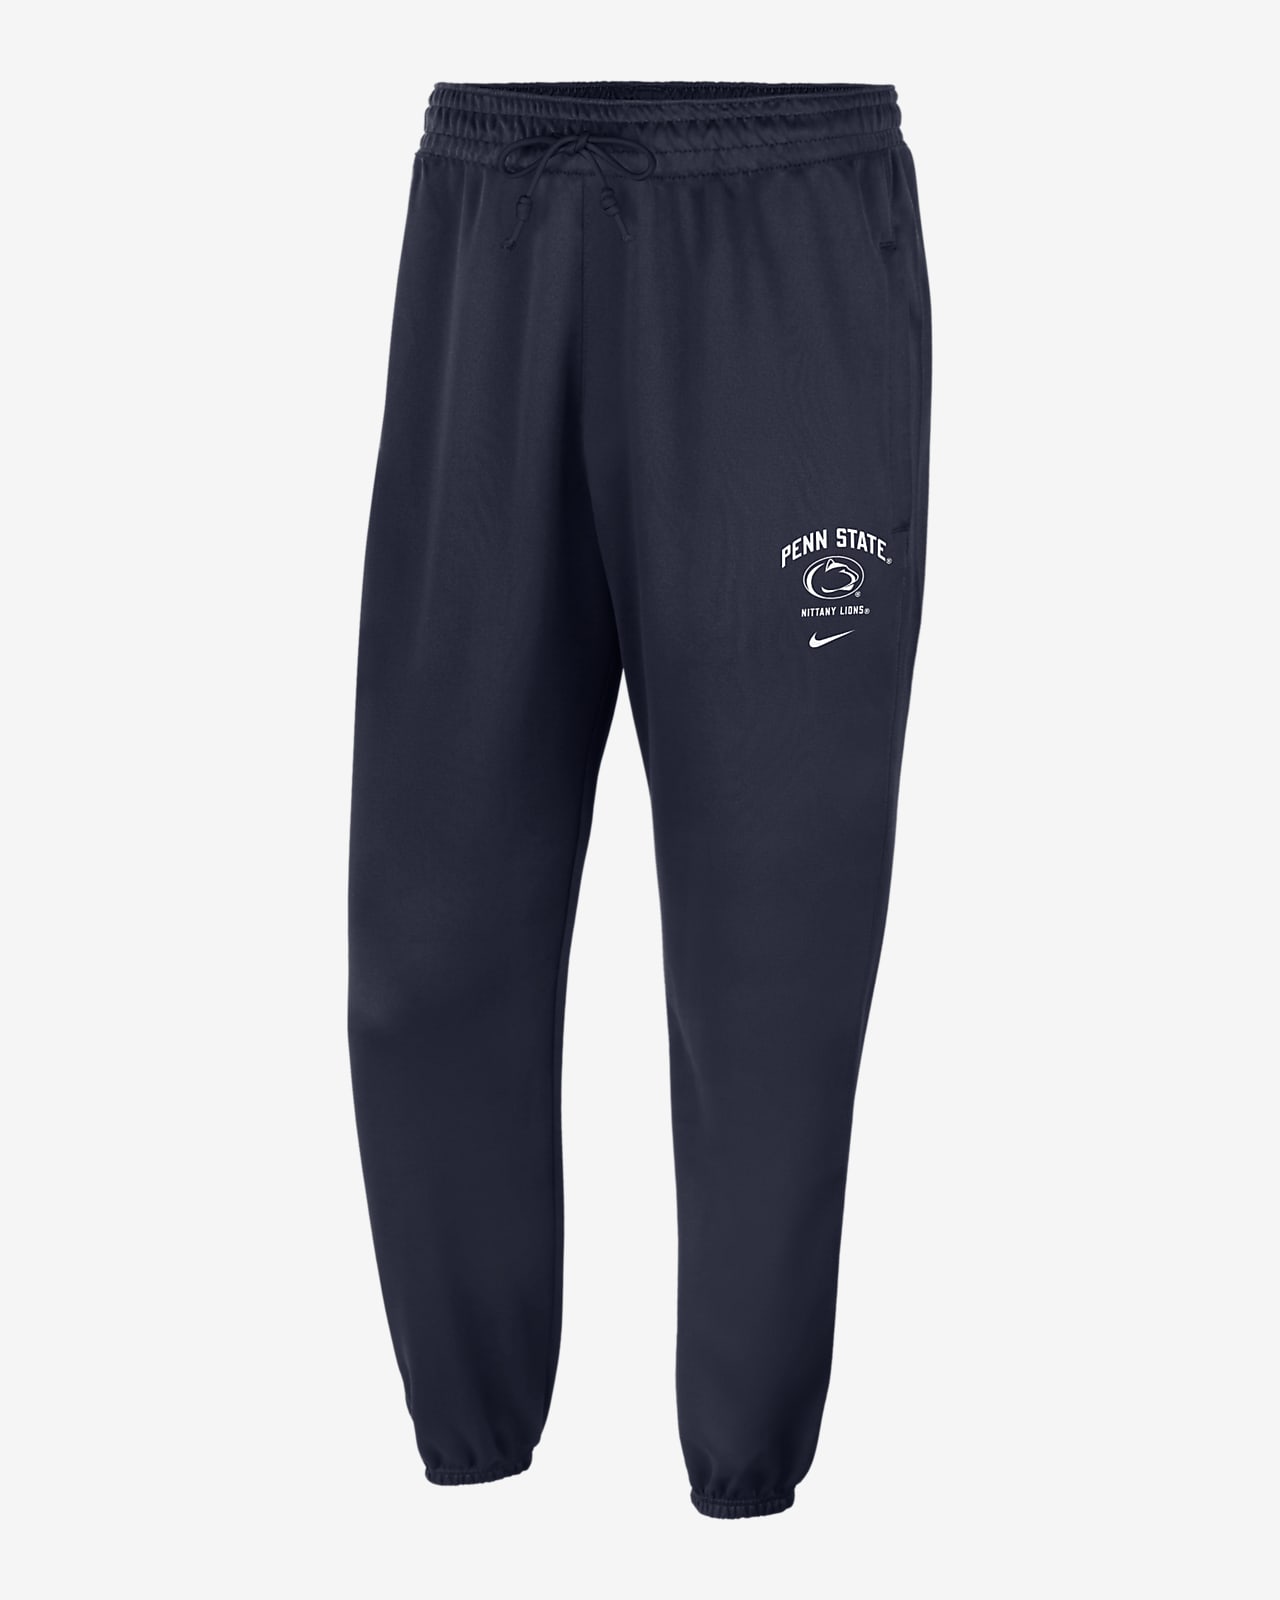 Penn State Standard Issue Men's Nike College Joggers